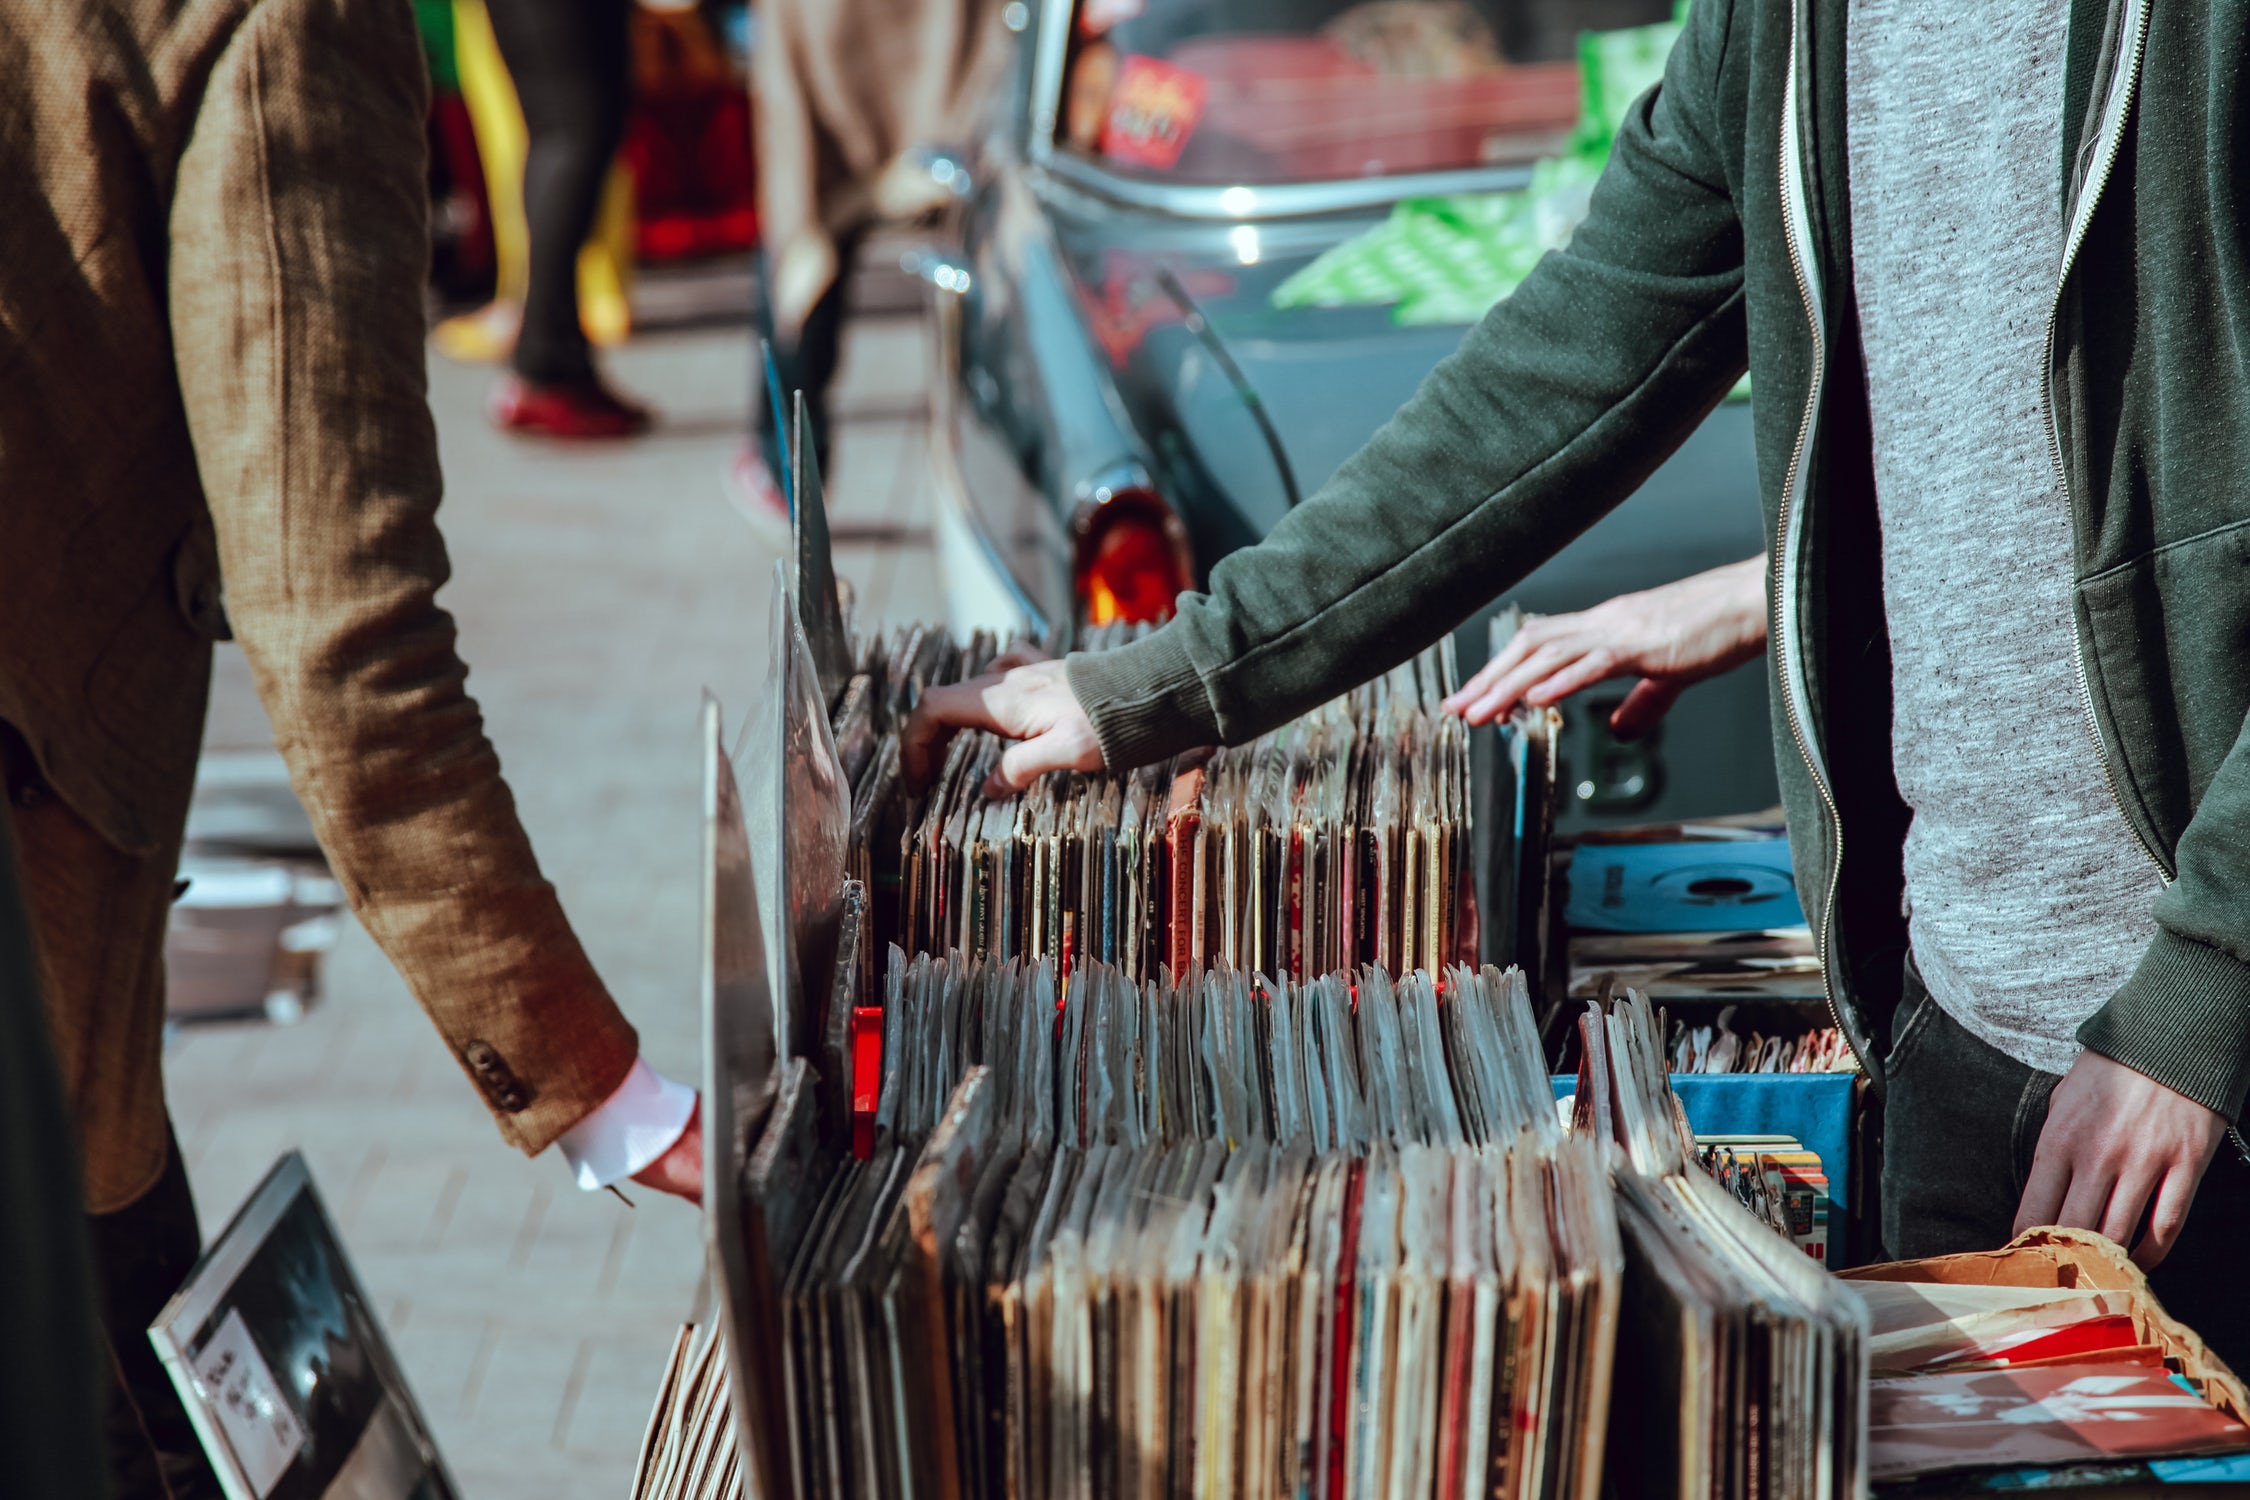 People browsing vinyl records at a stall on the street.jpg-499.2kB